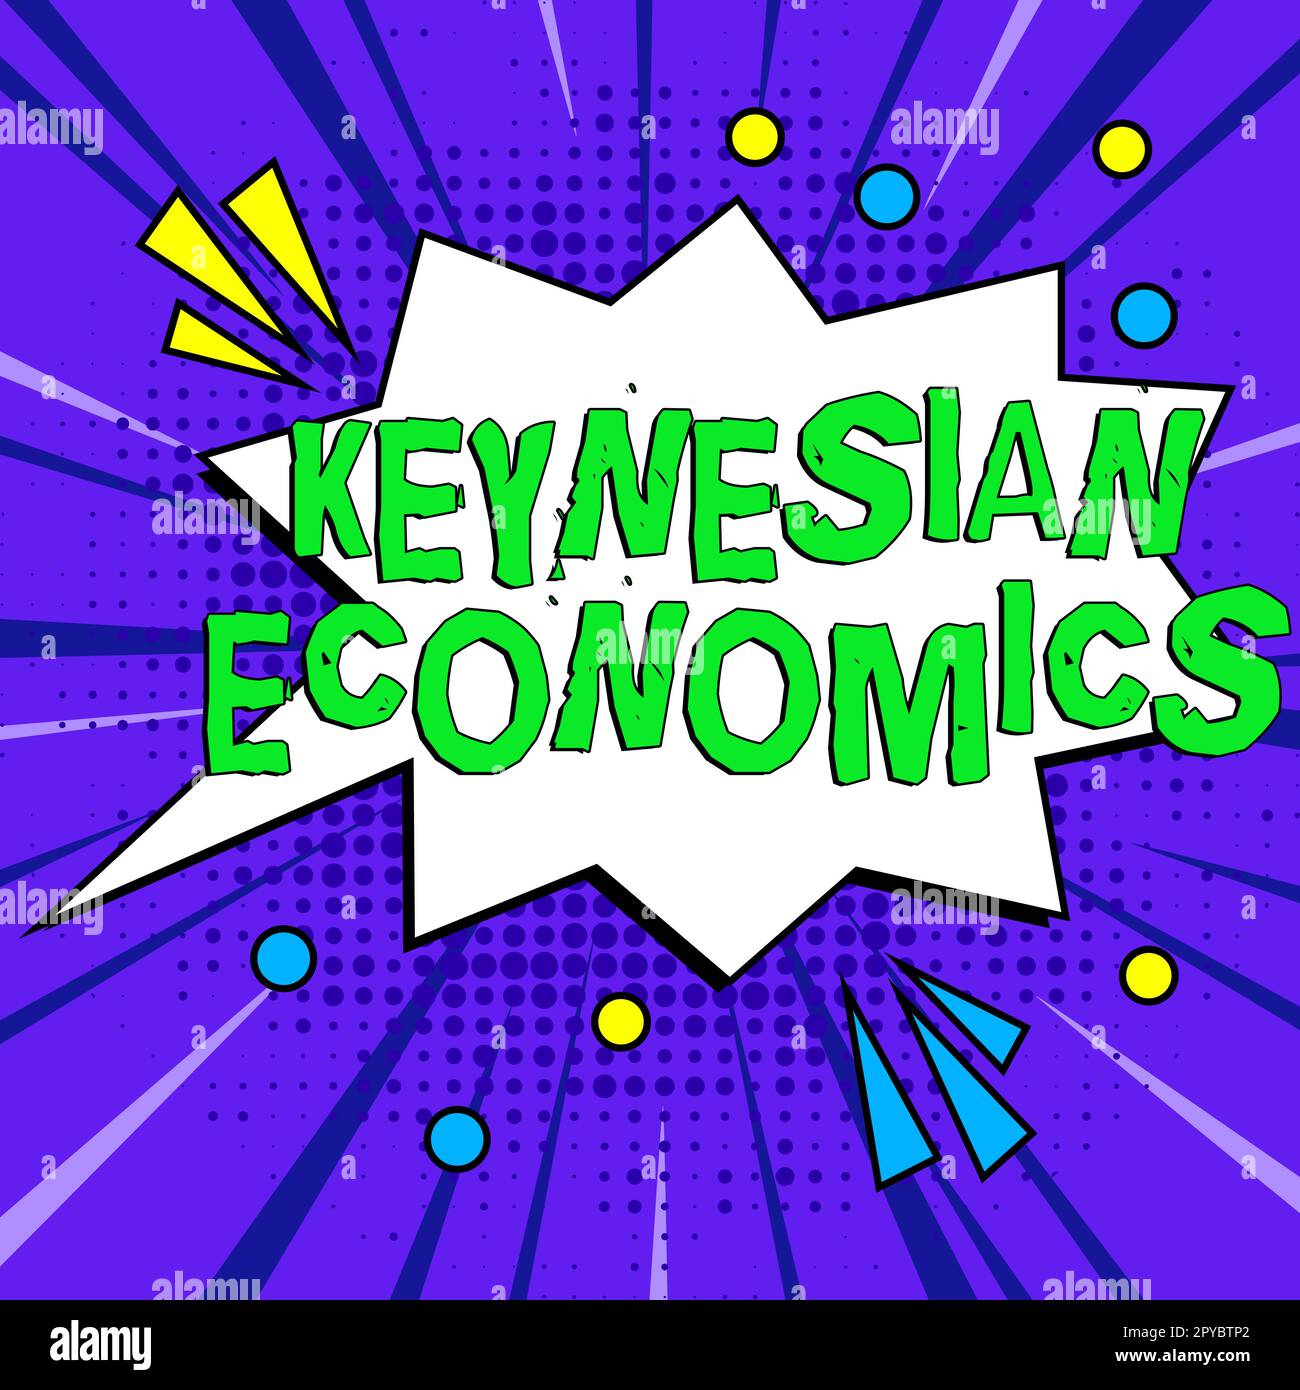 Text showing inspiration Keynesian Economics. Business idea monetary and fiscal programs by government to increase employment Stock Photo